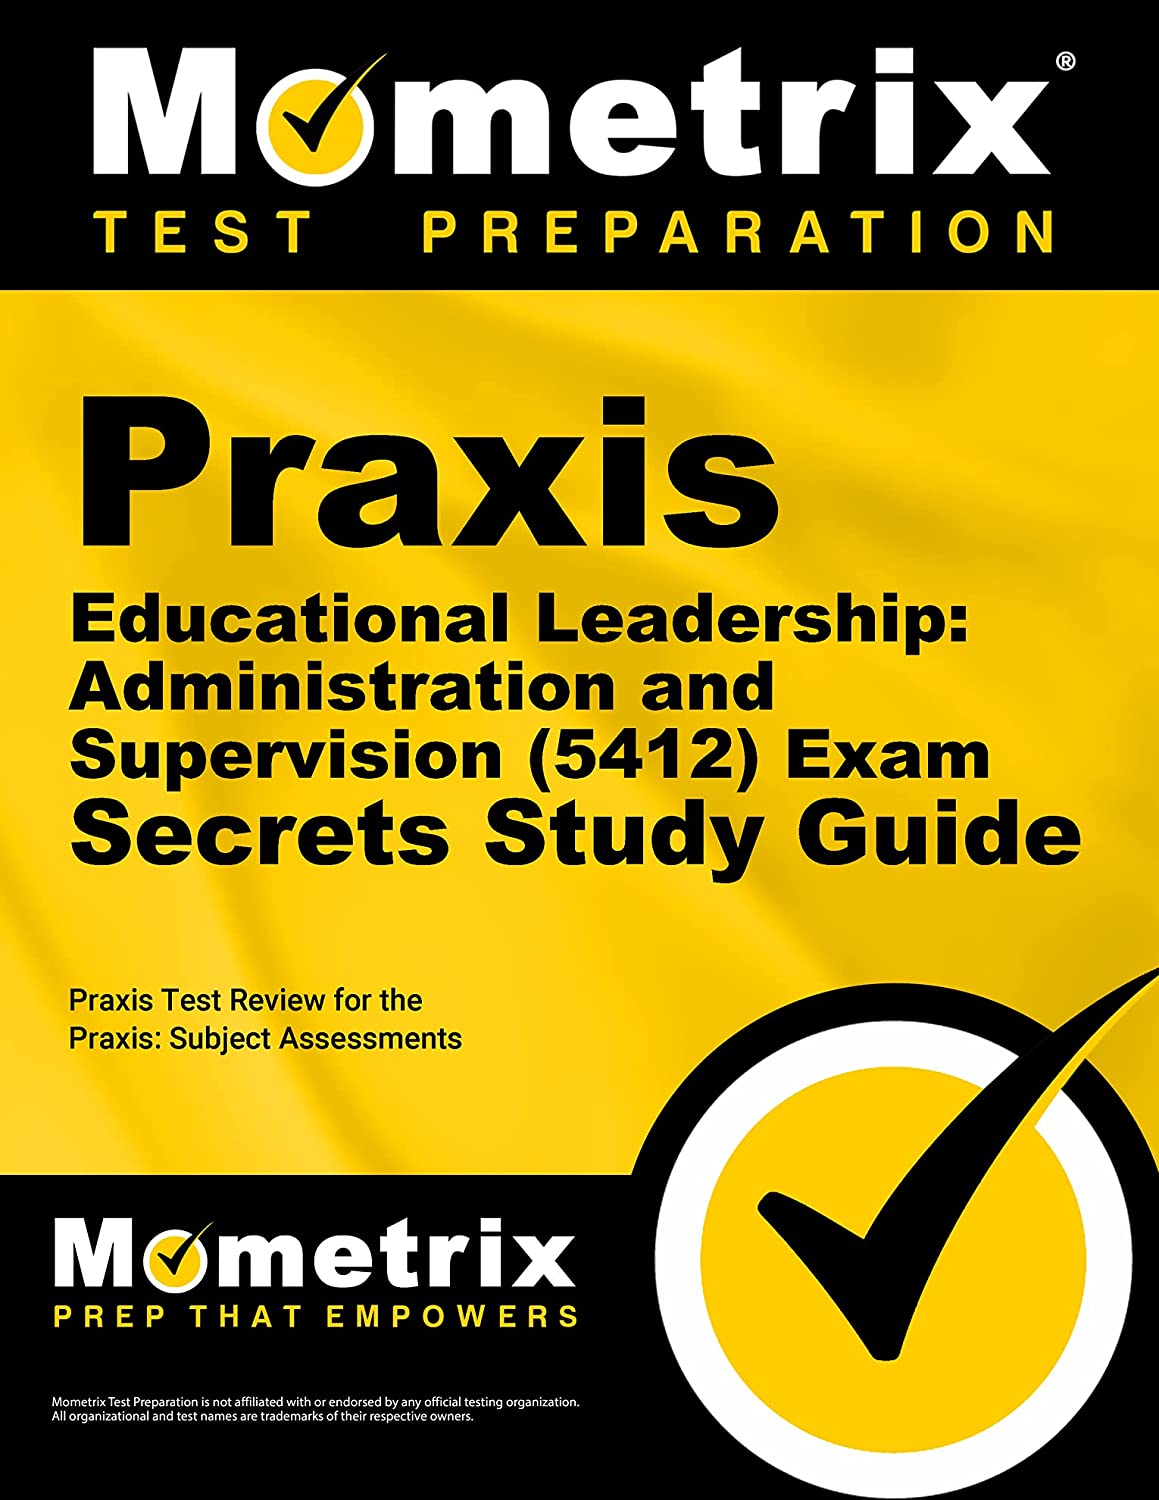 Praxis Educational Leadership Administration and Supervision (5412) Exam Secrets Study Guide: Praxis Test Review for the Praxis Subject Assessments